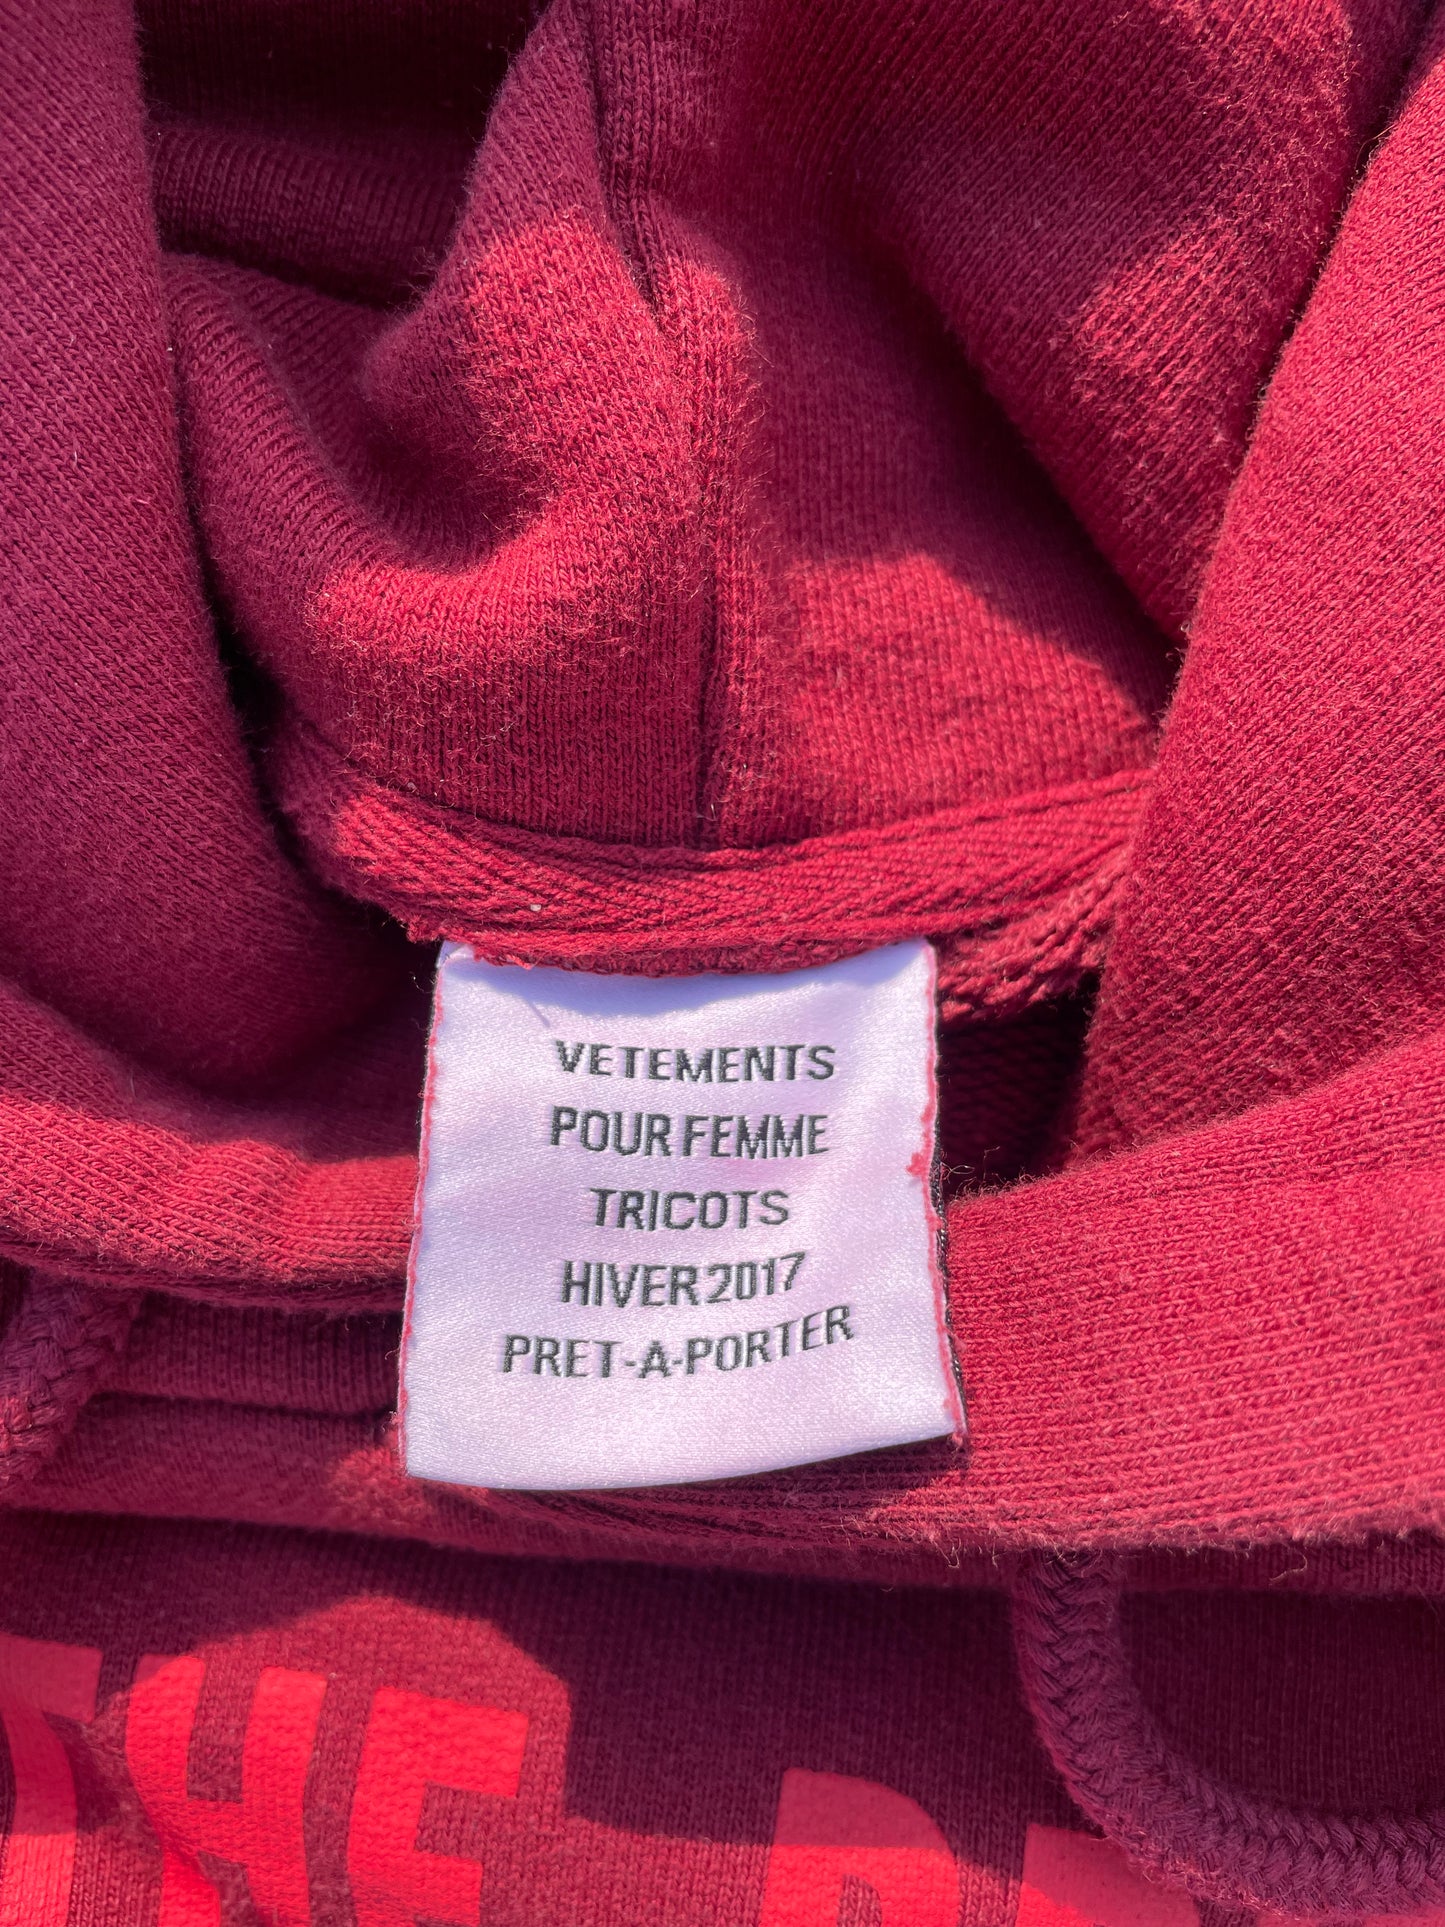 AW17 Vetements “May The Bridges I Burn” Cropped Hoodie